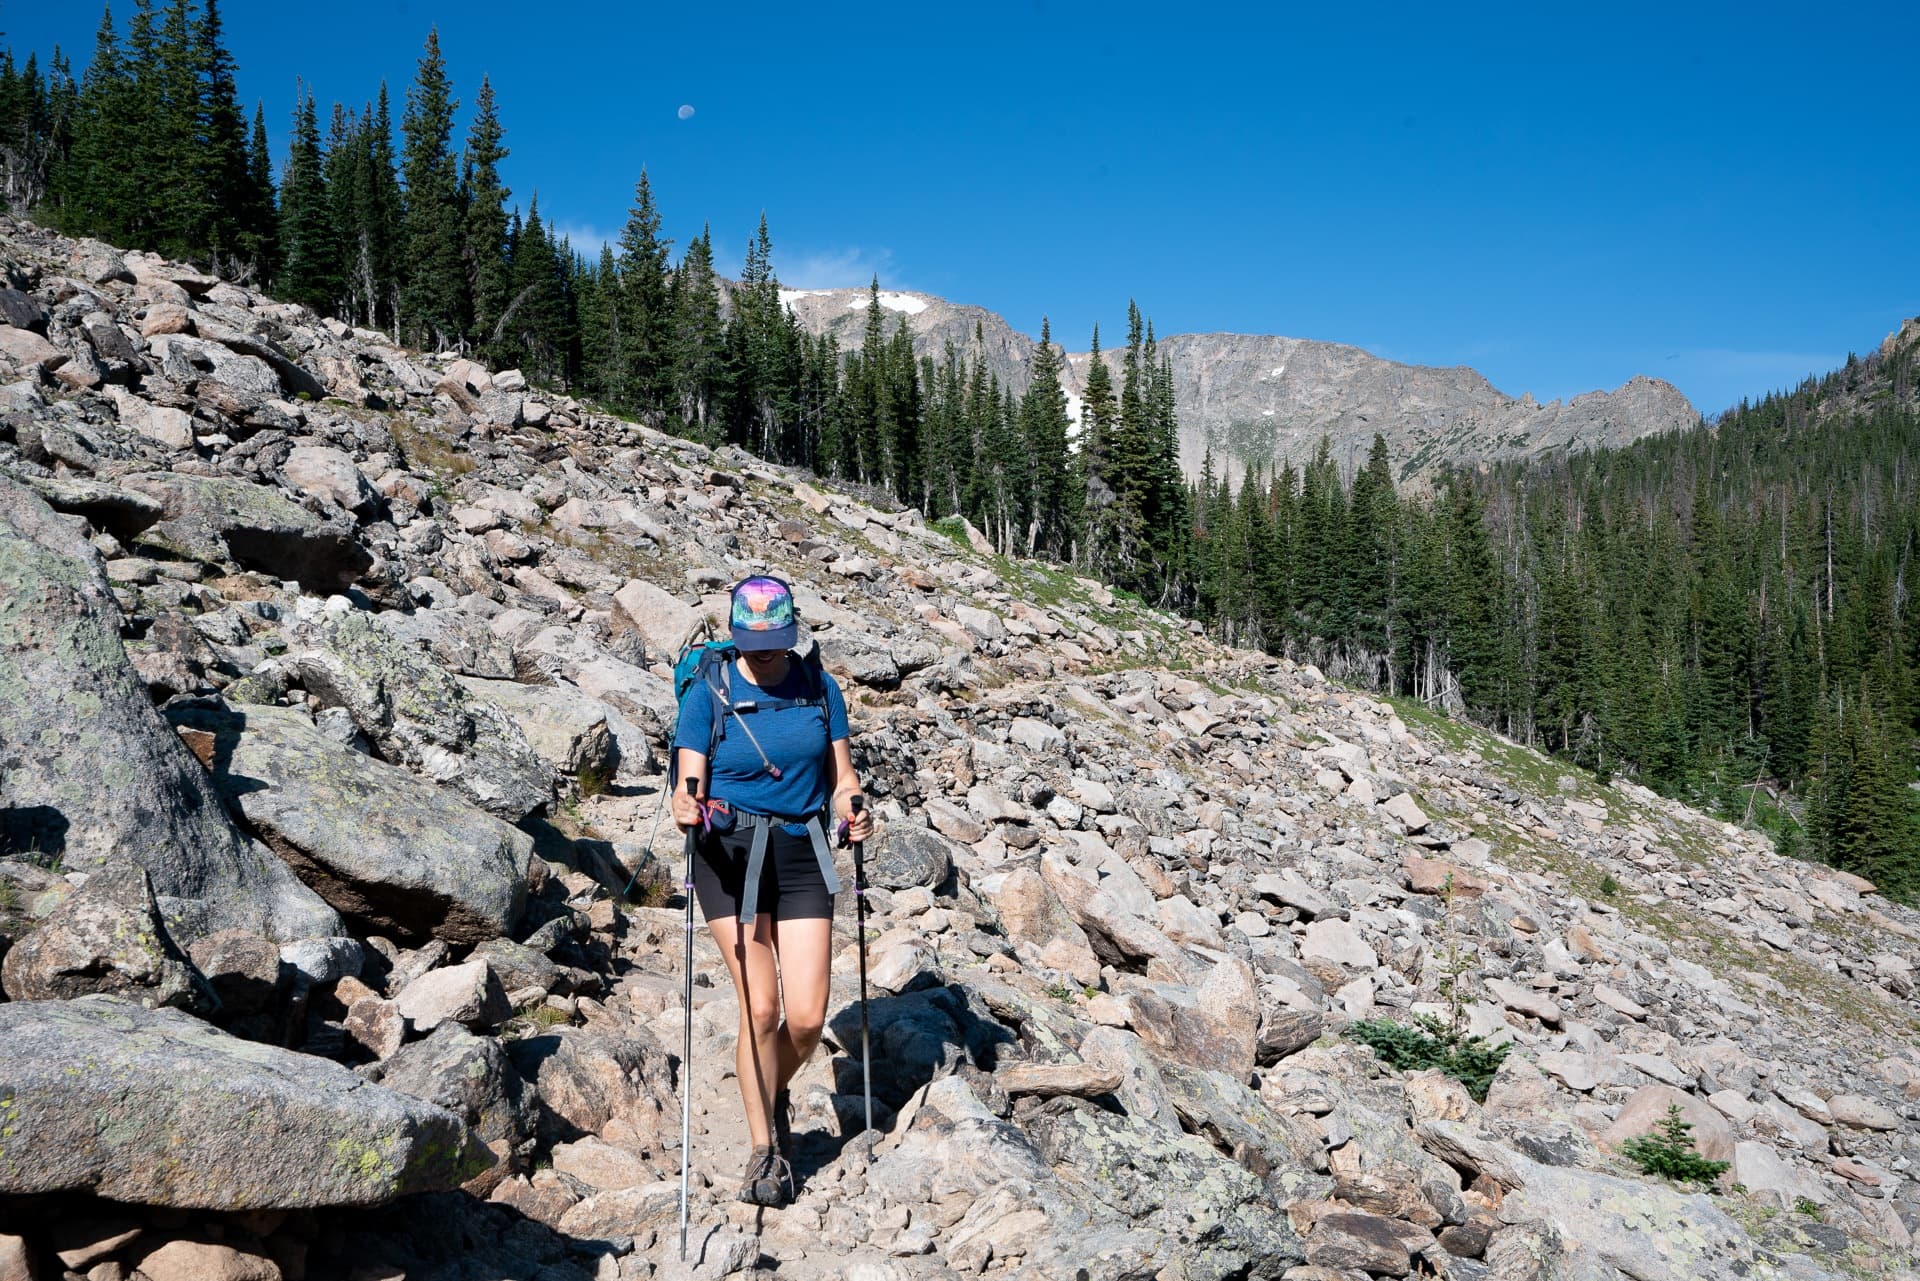 Not sure what to wear hiking? Learn how to dress for both function & comfort on the trail in a variety of conditions with this women's hiking apparel guide.